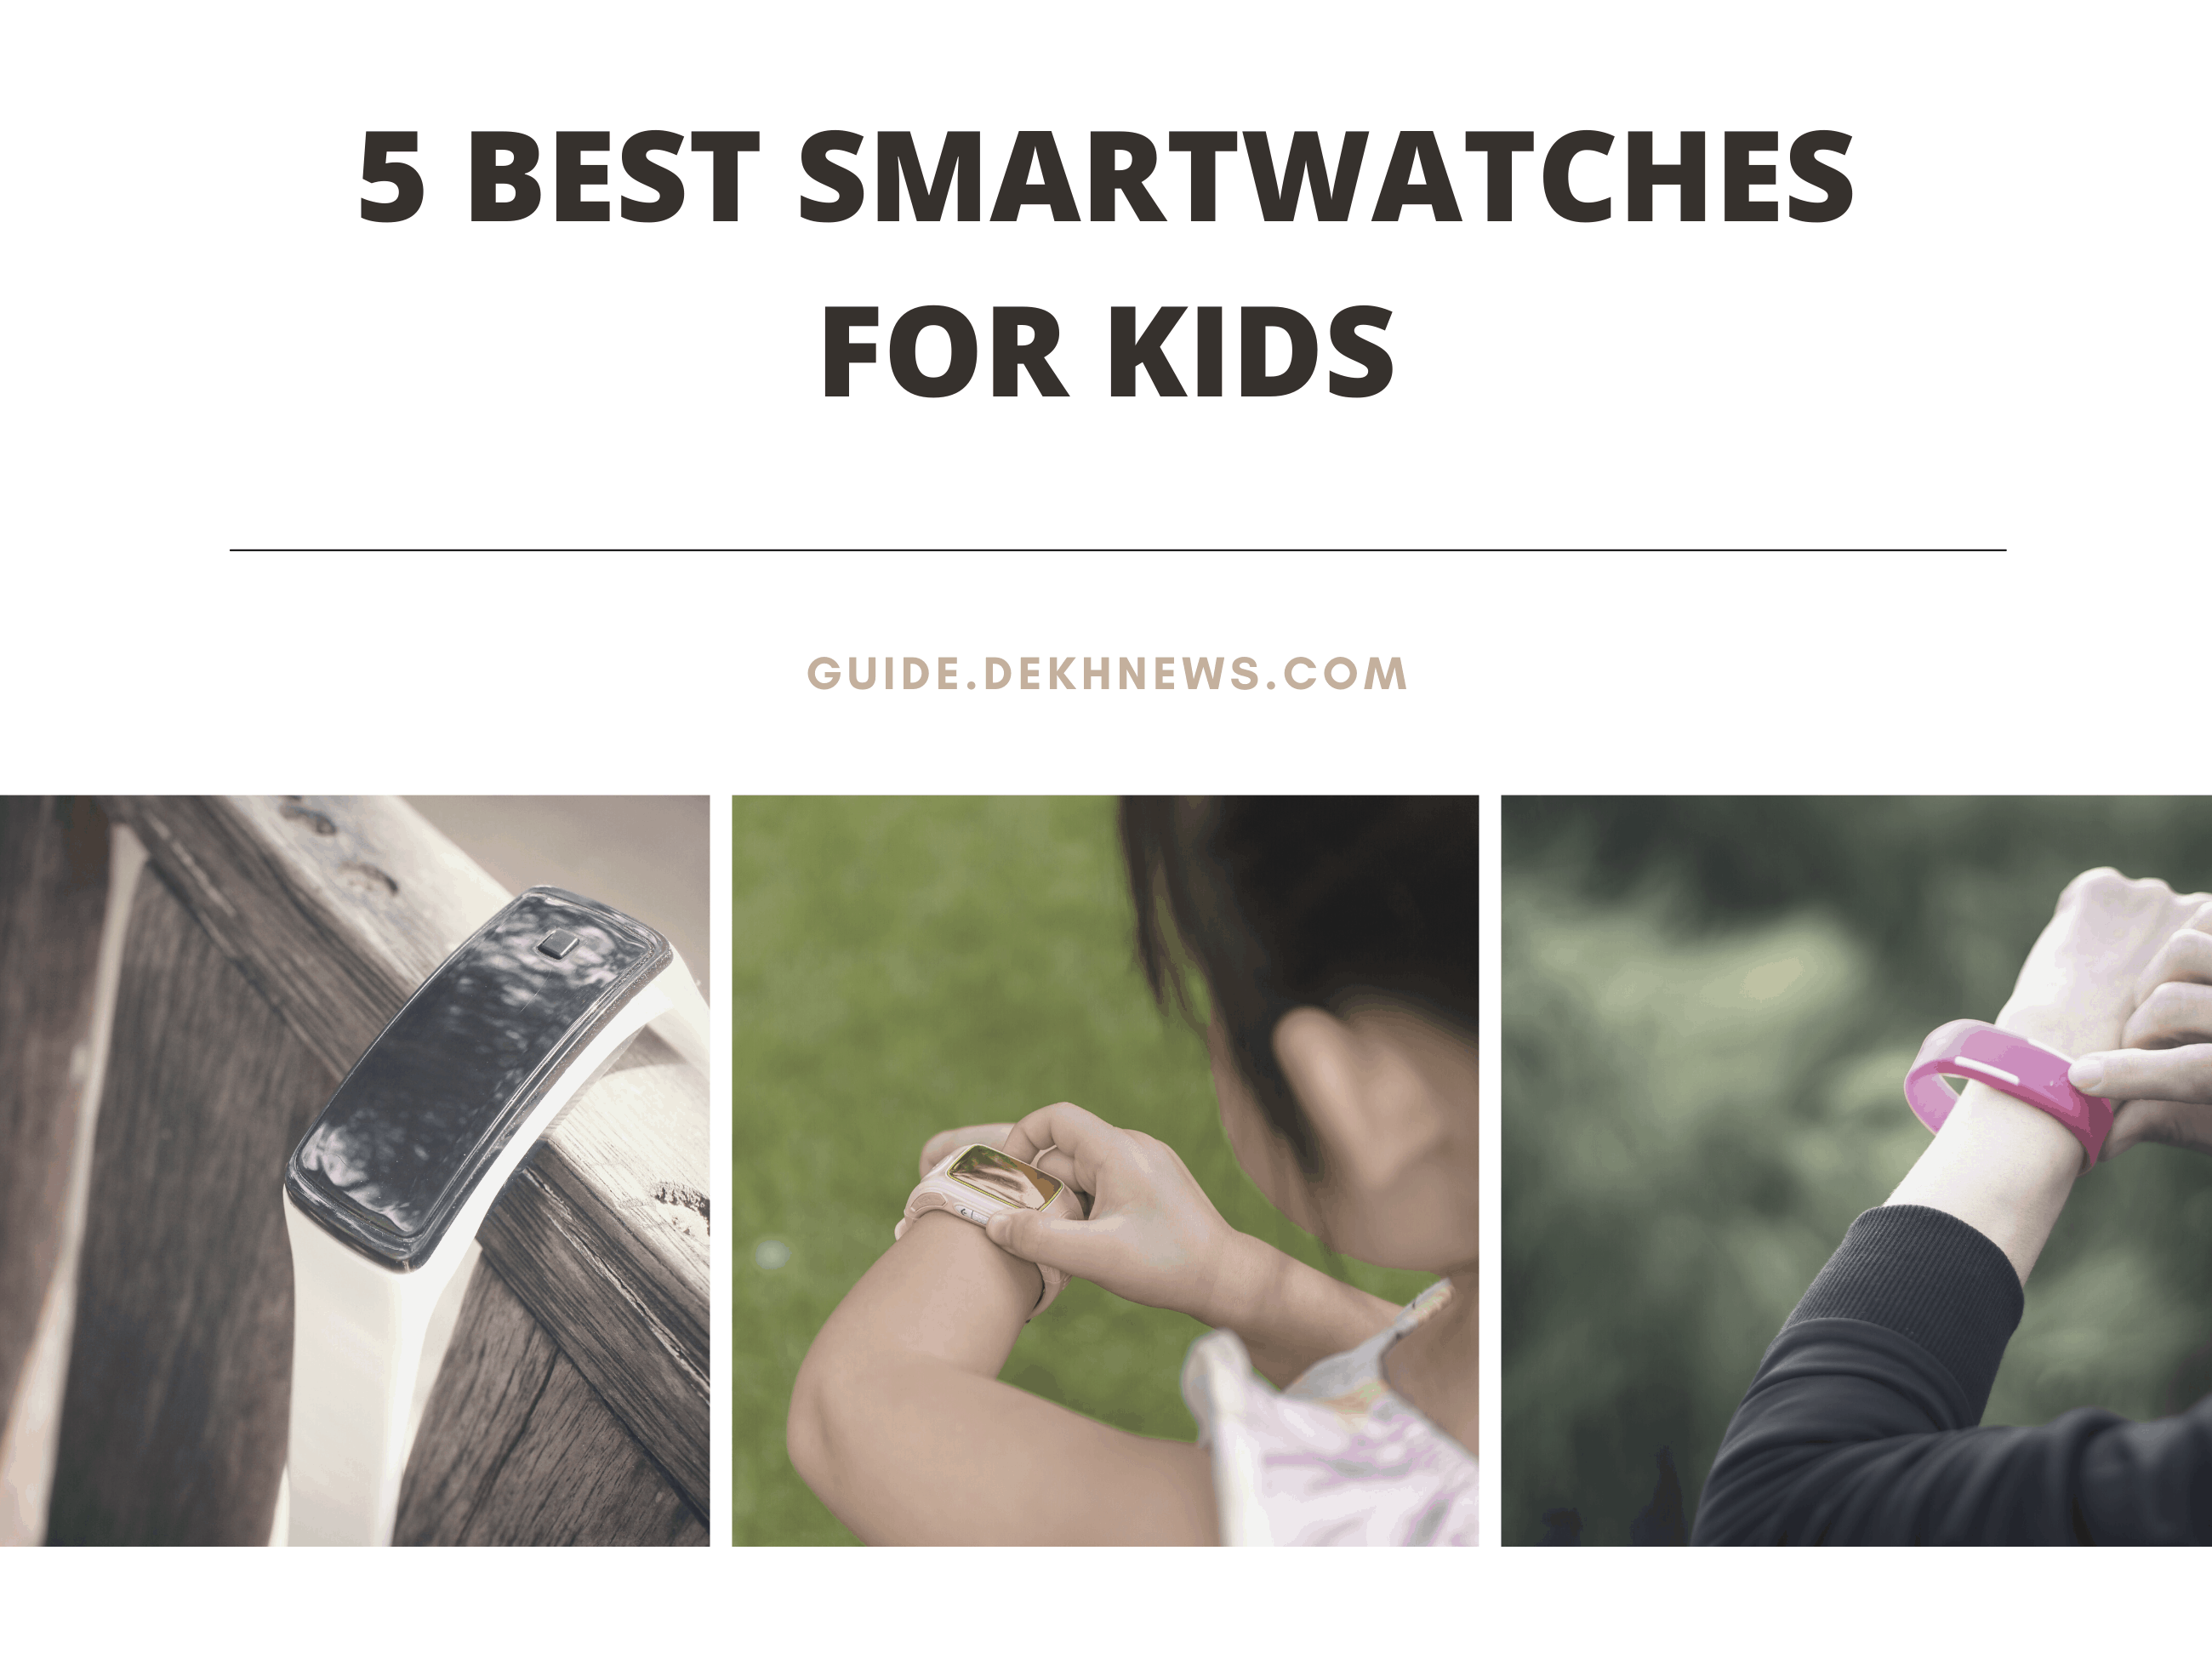 6 Best Smartwatches for Kids